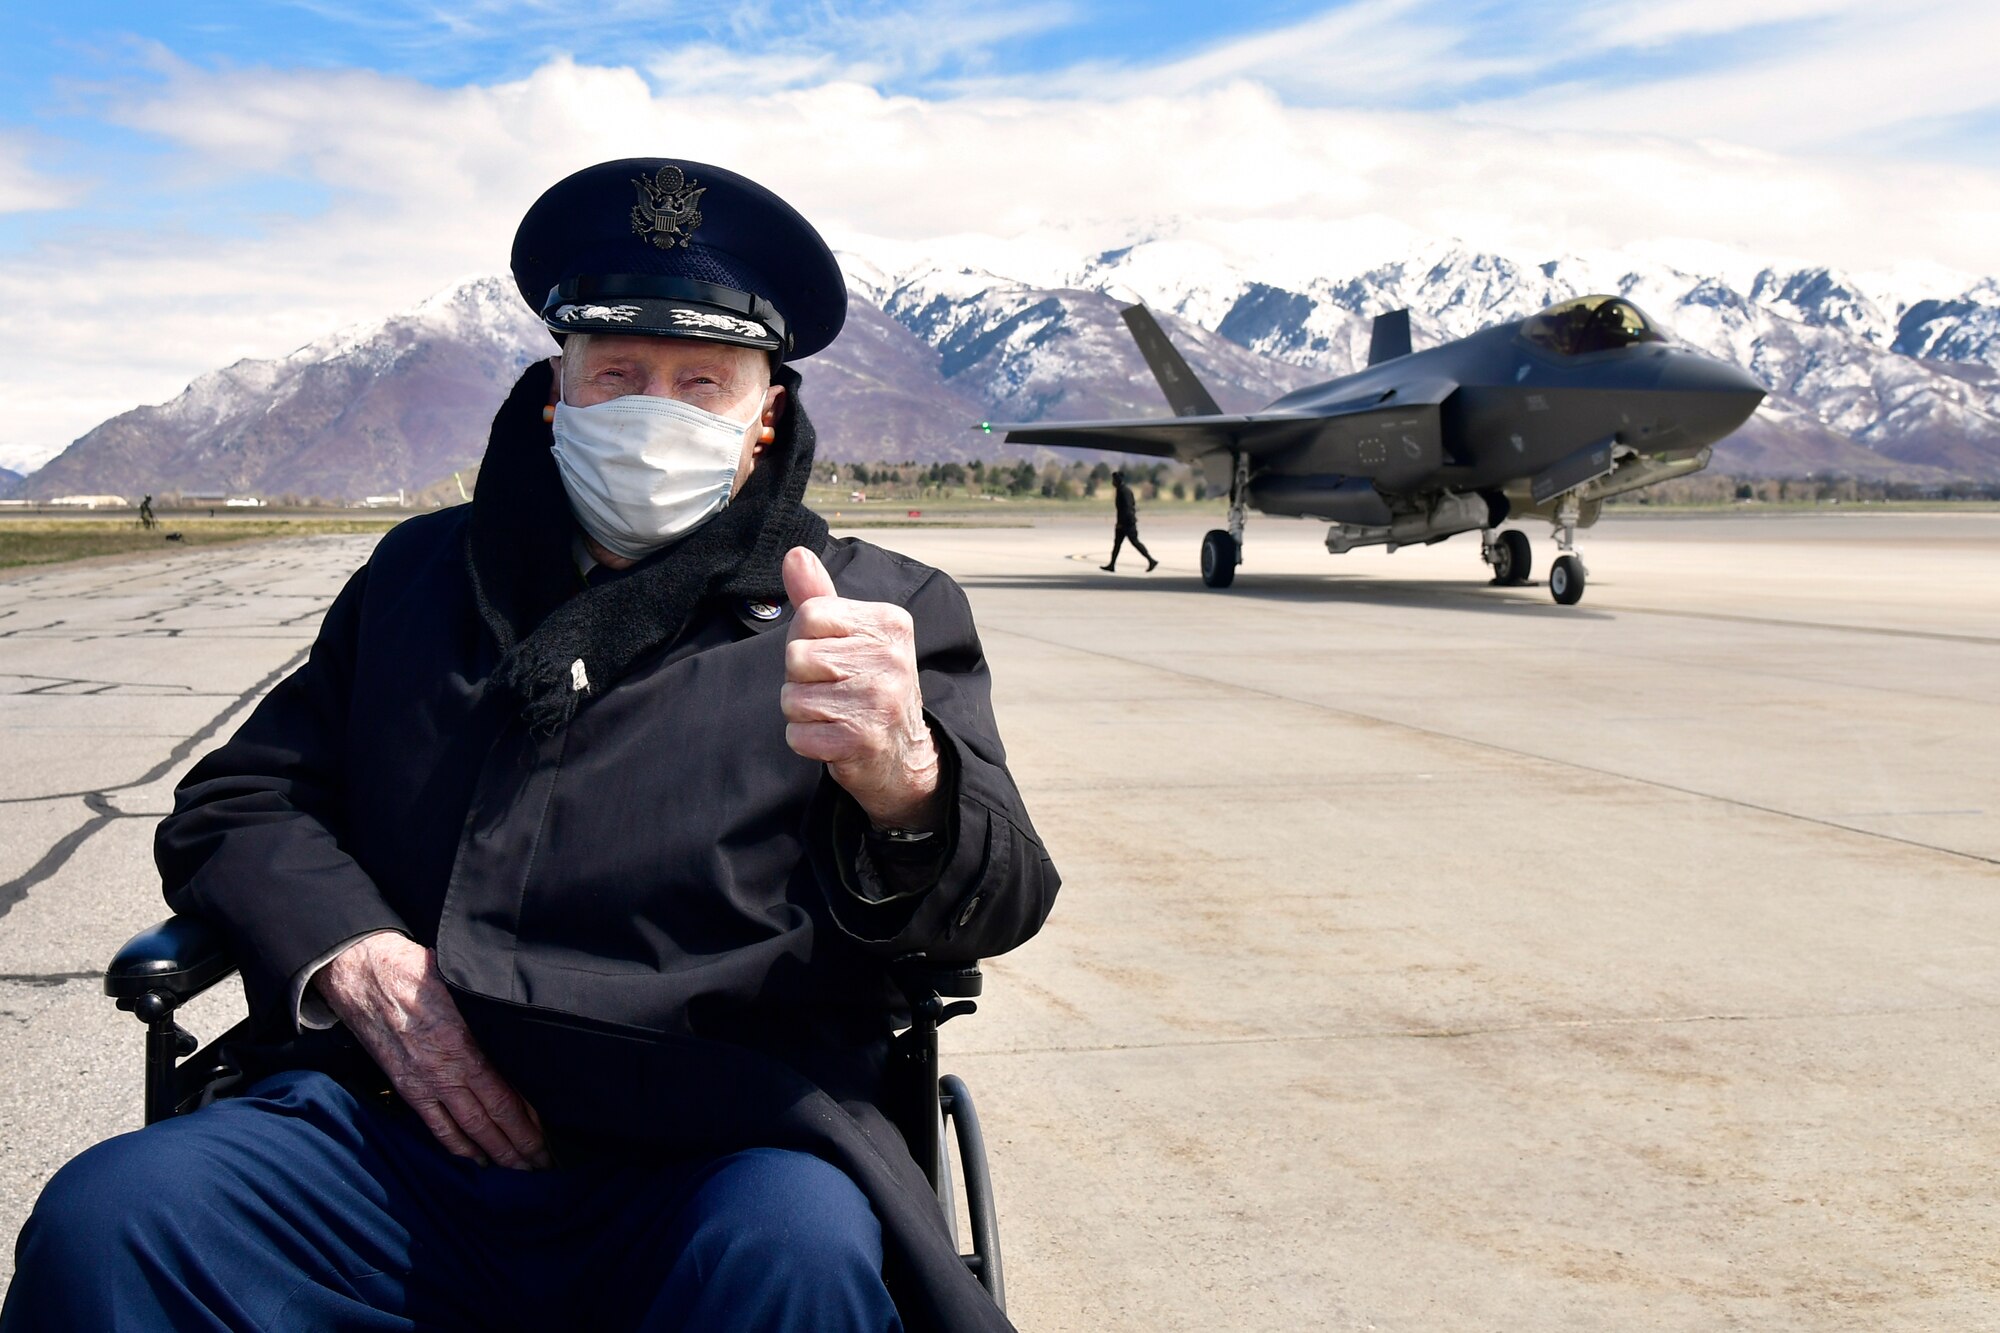 Retired Air Force Col. Gail Halvorsen, the “Berlin Candy Bomber,” poses for a picture in front of an F-35A Lightning II